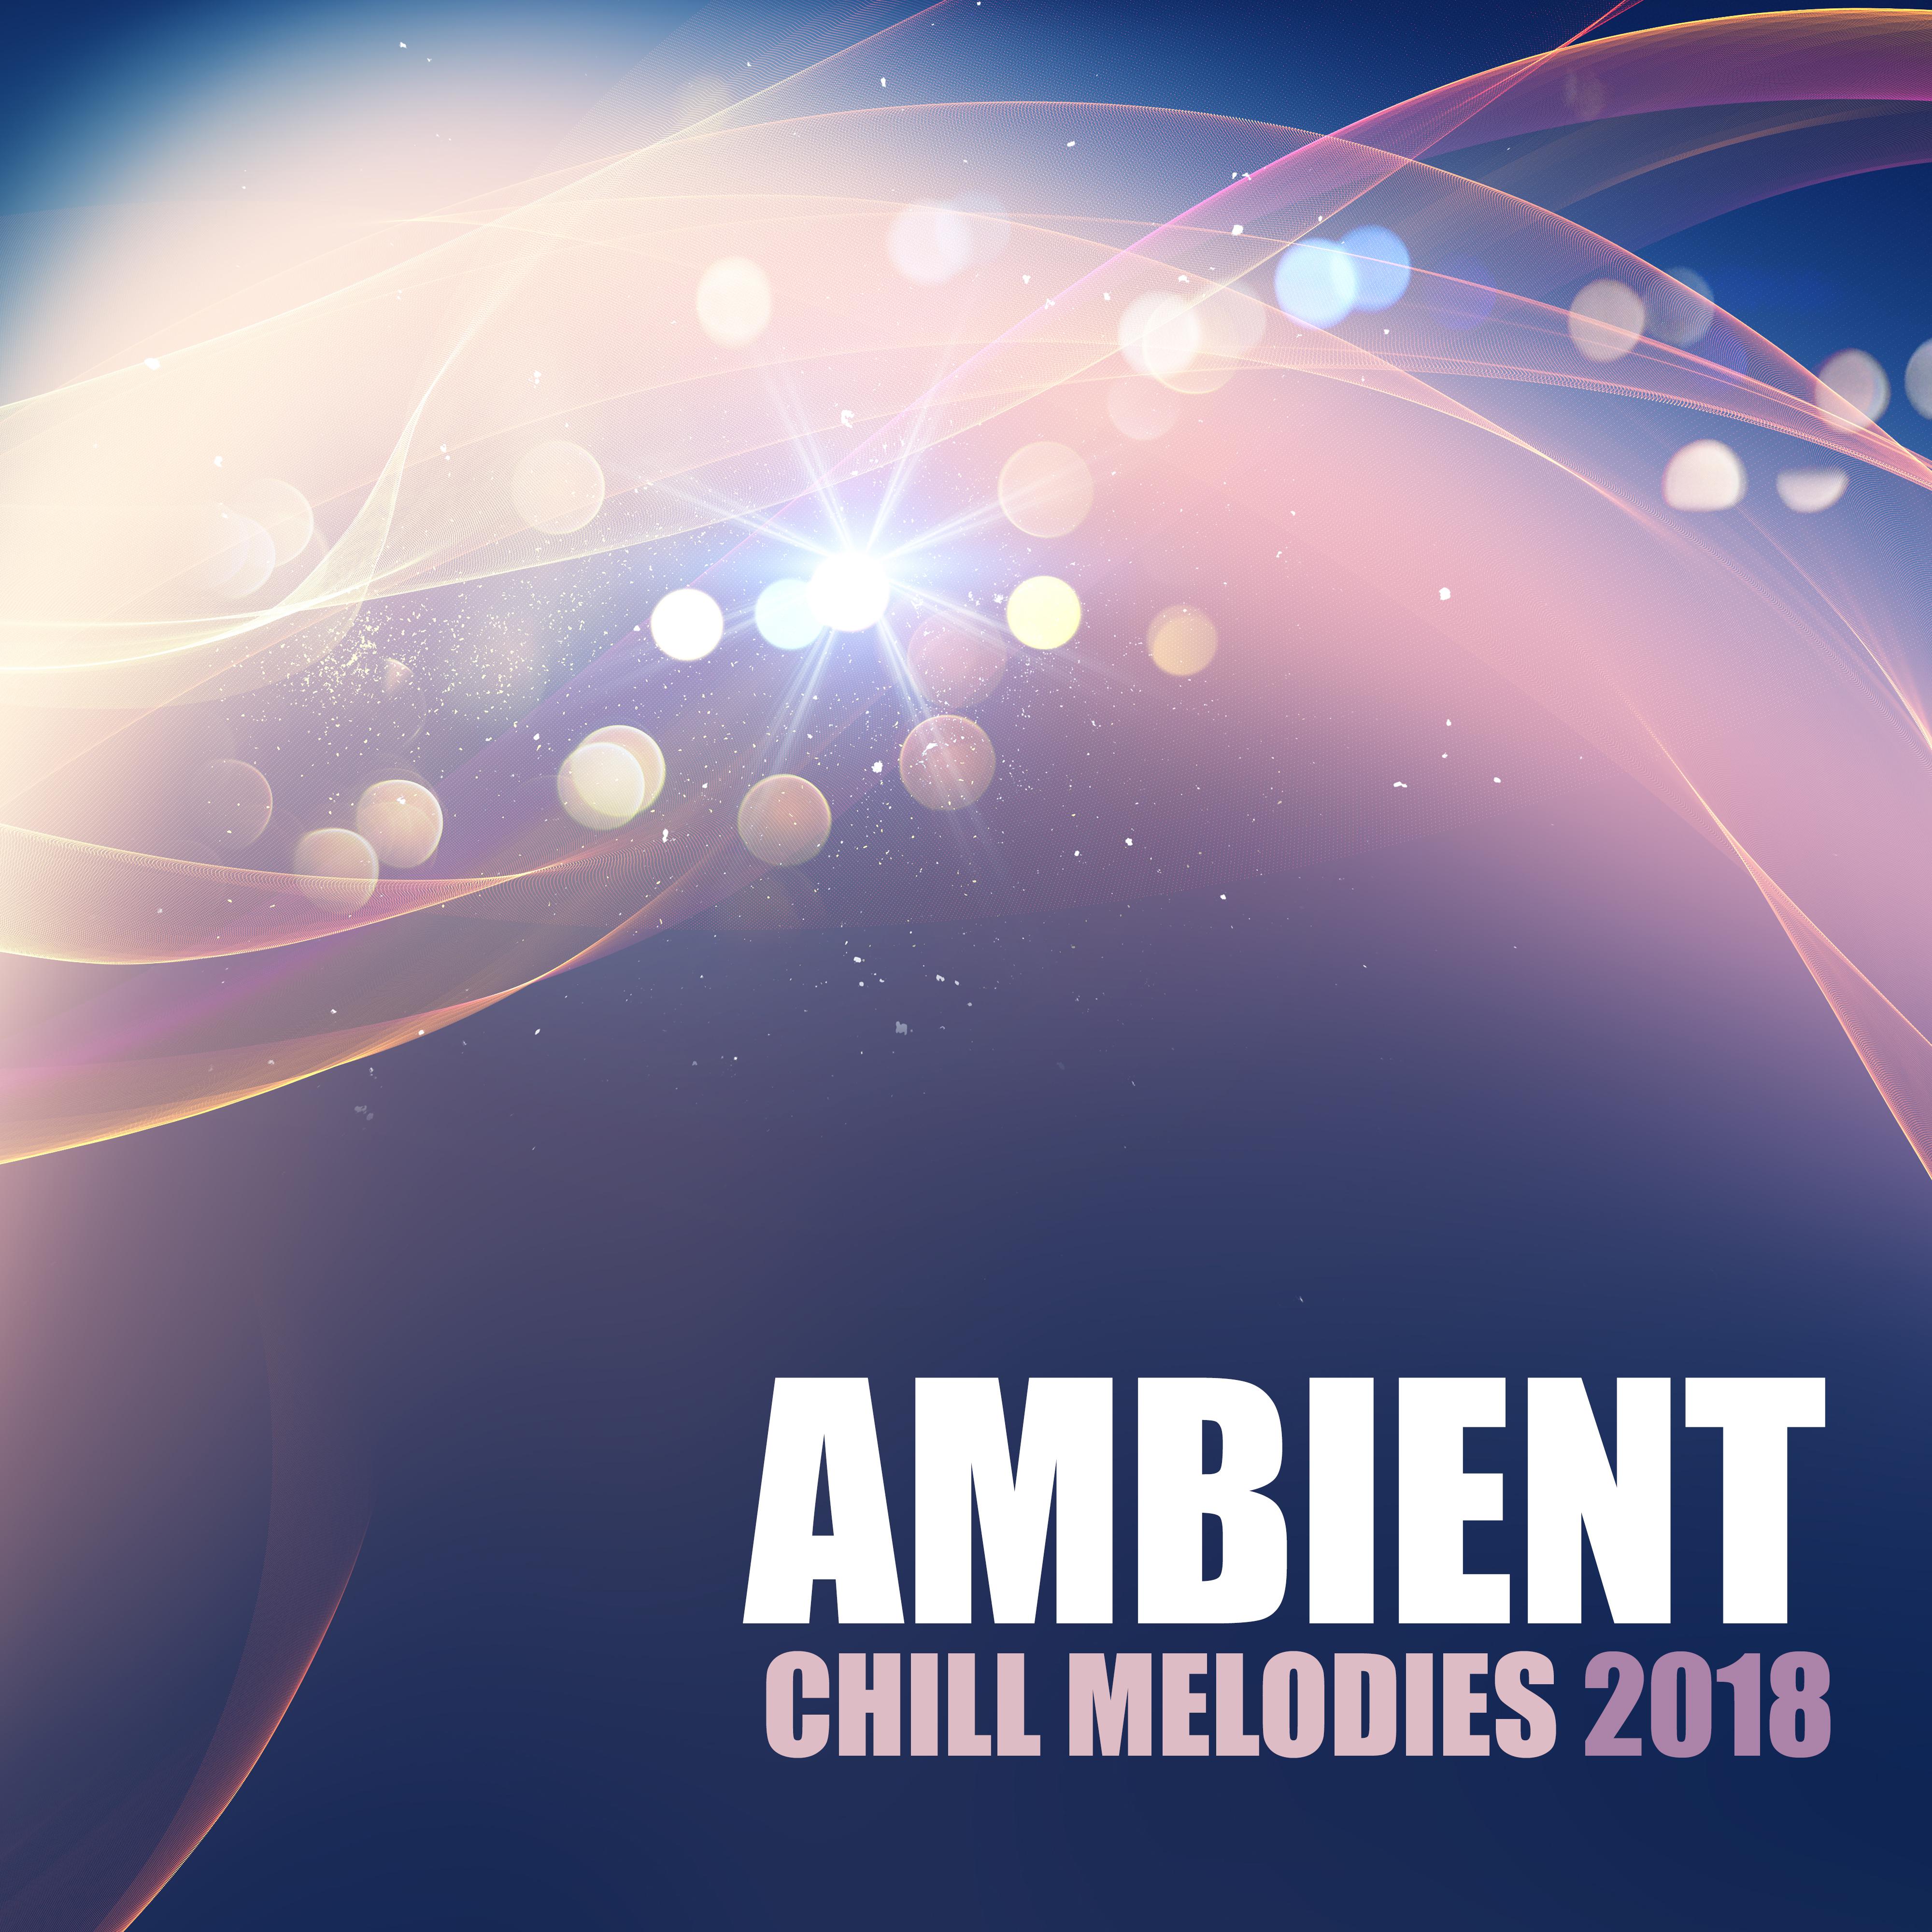 Ambient Chill Melodies 2018